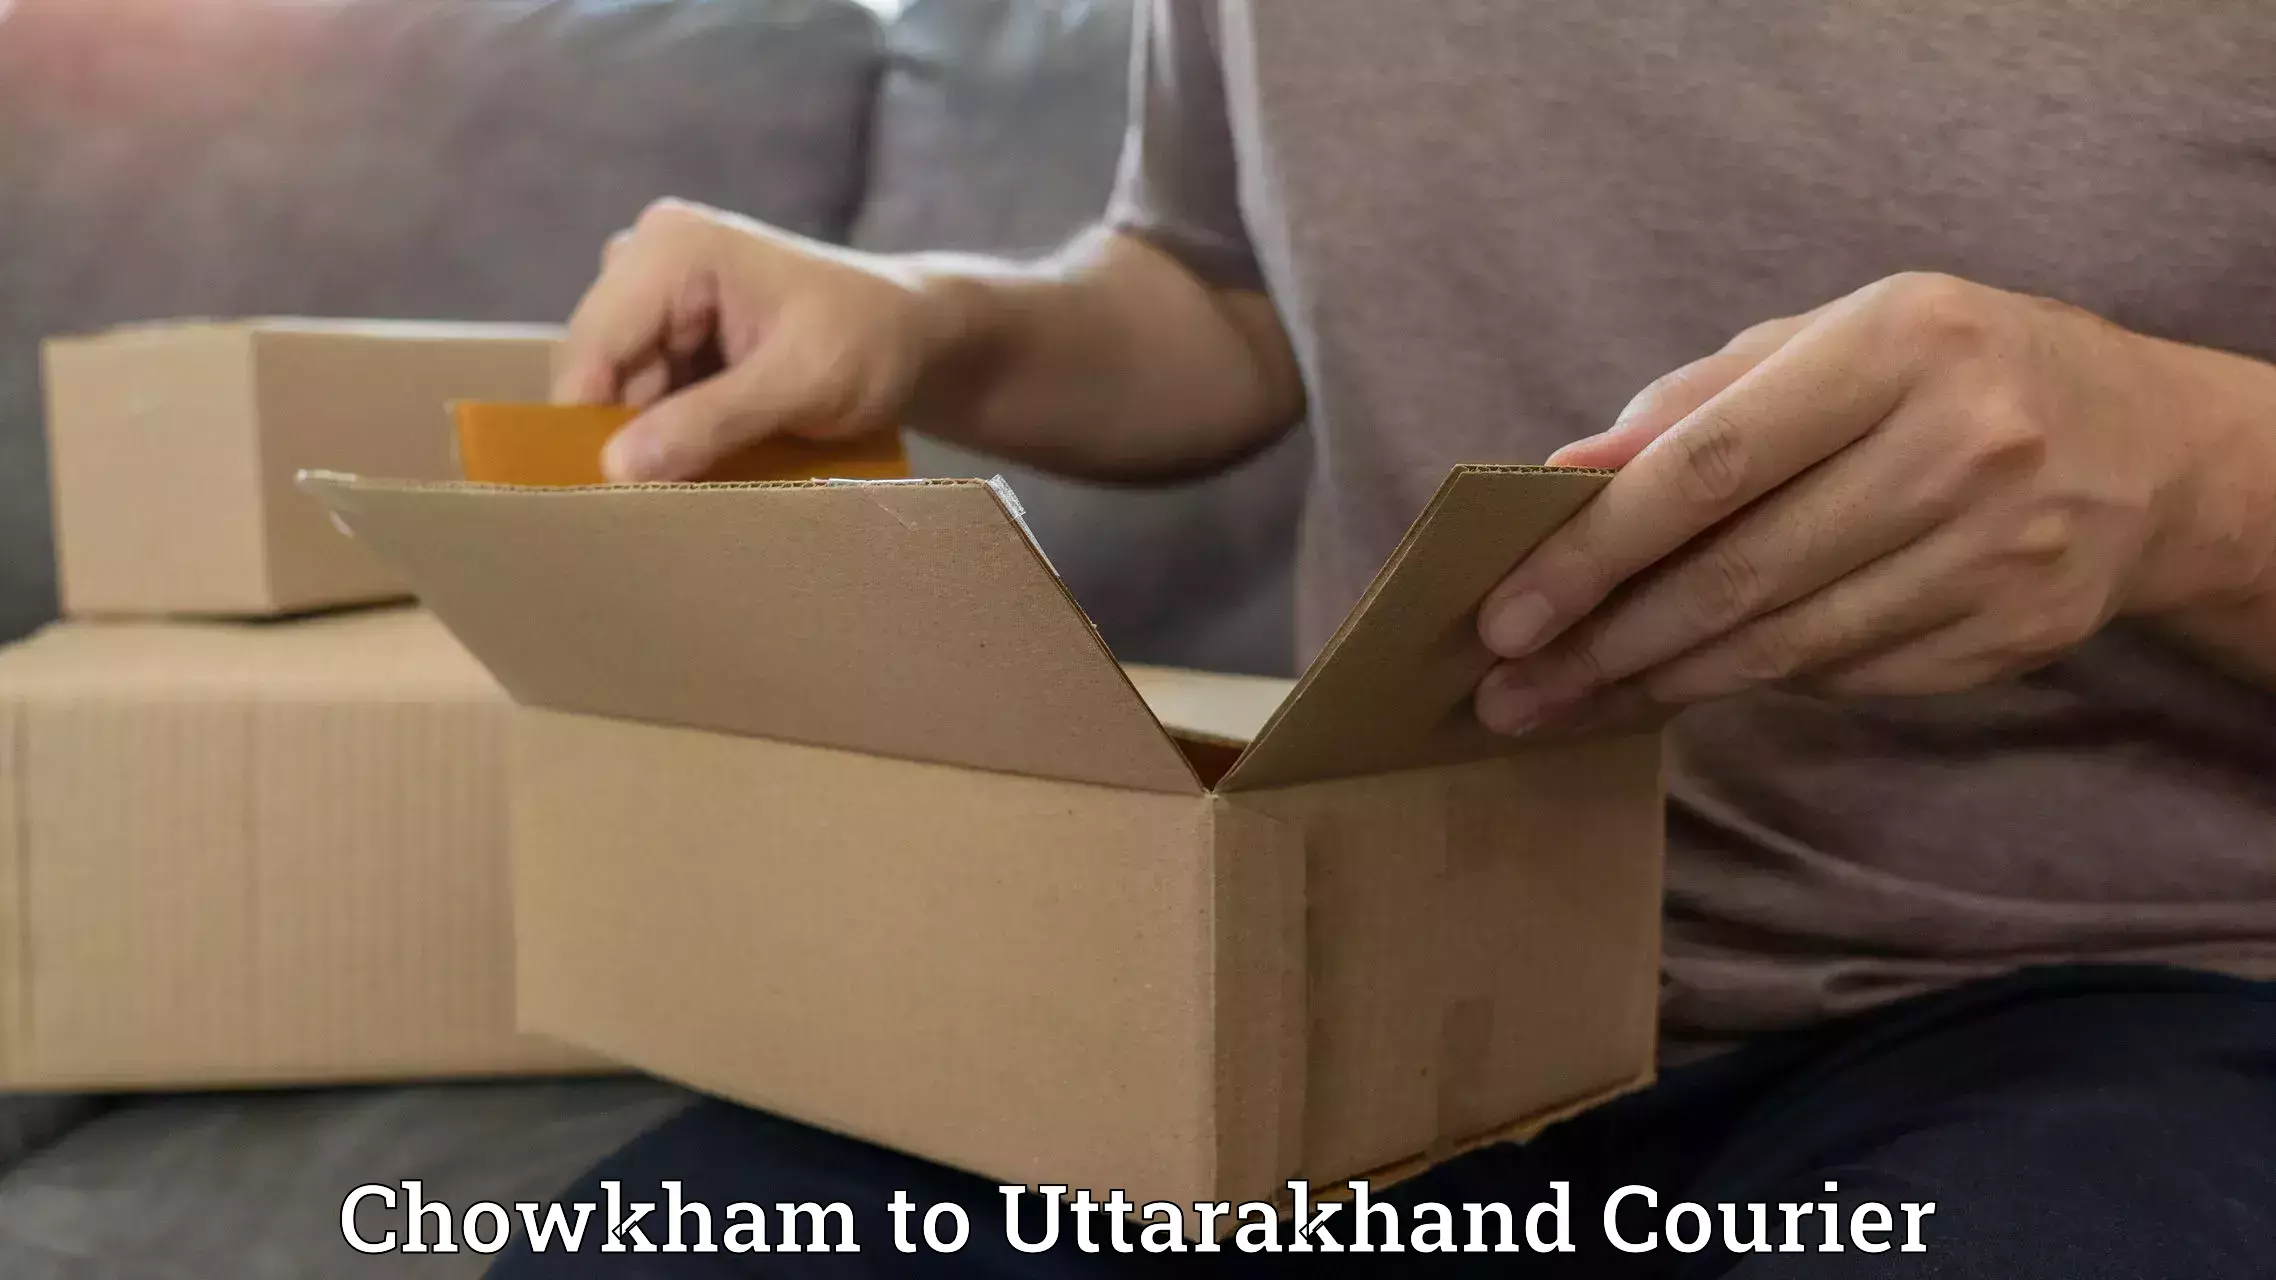 Personal courier services Chowkham to Nainital